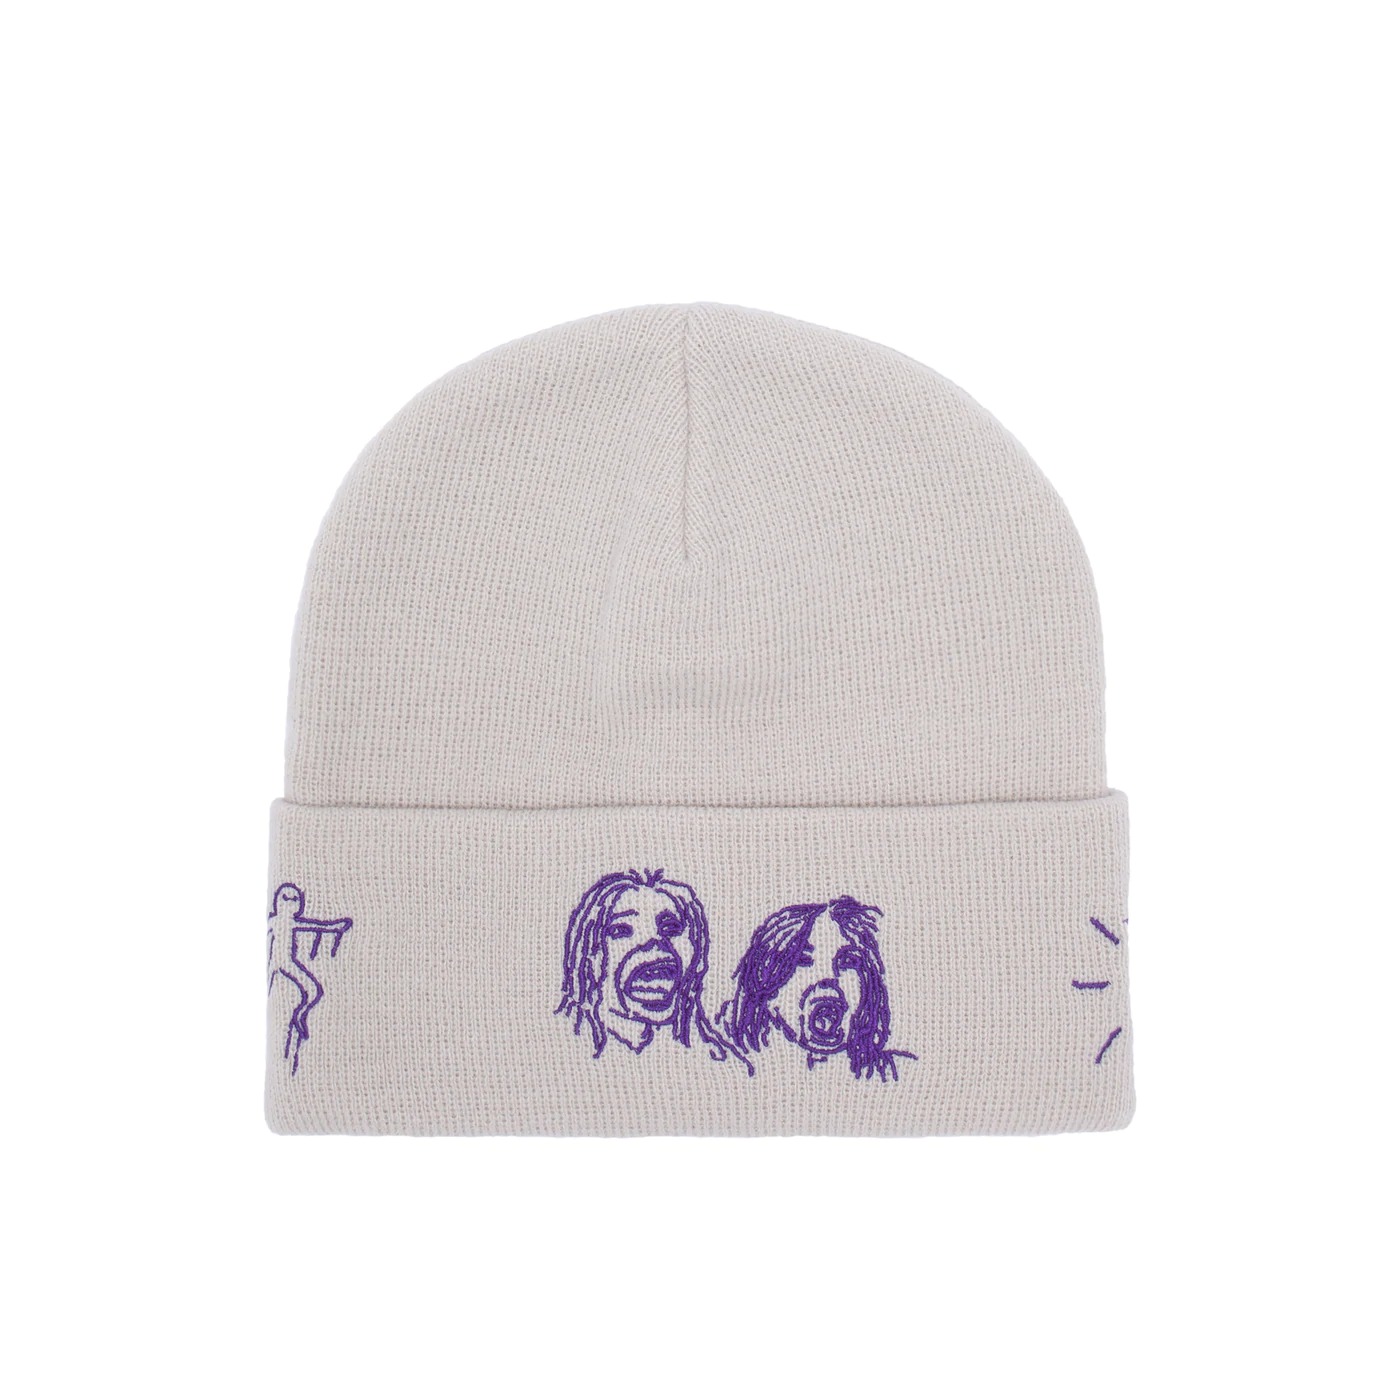 FUCKING AWESOME SKETCHY CUFF BEANIE ビーニー ニットキャップ